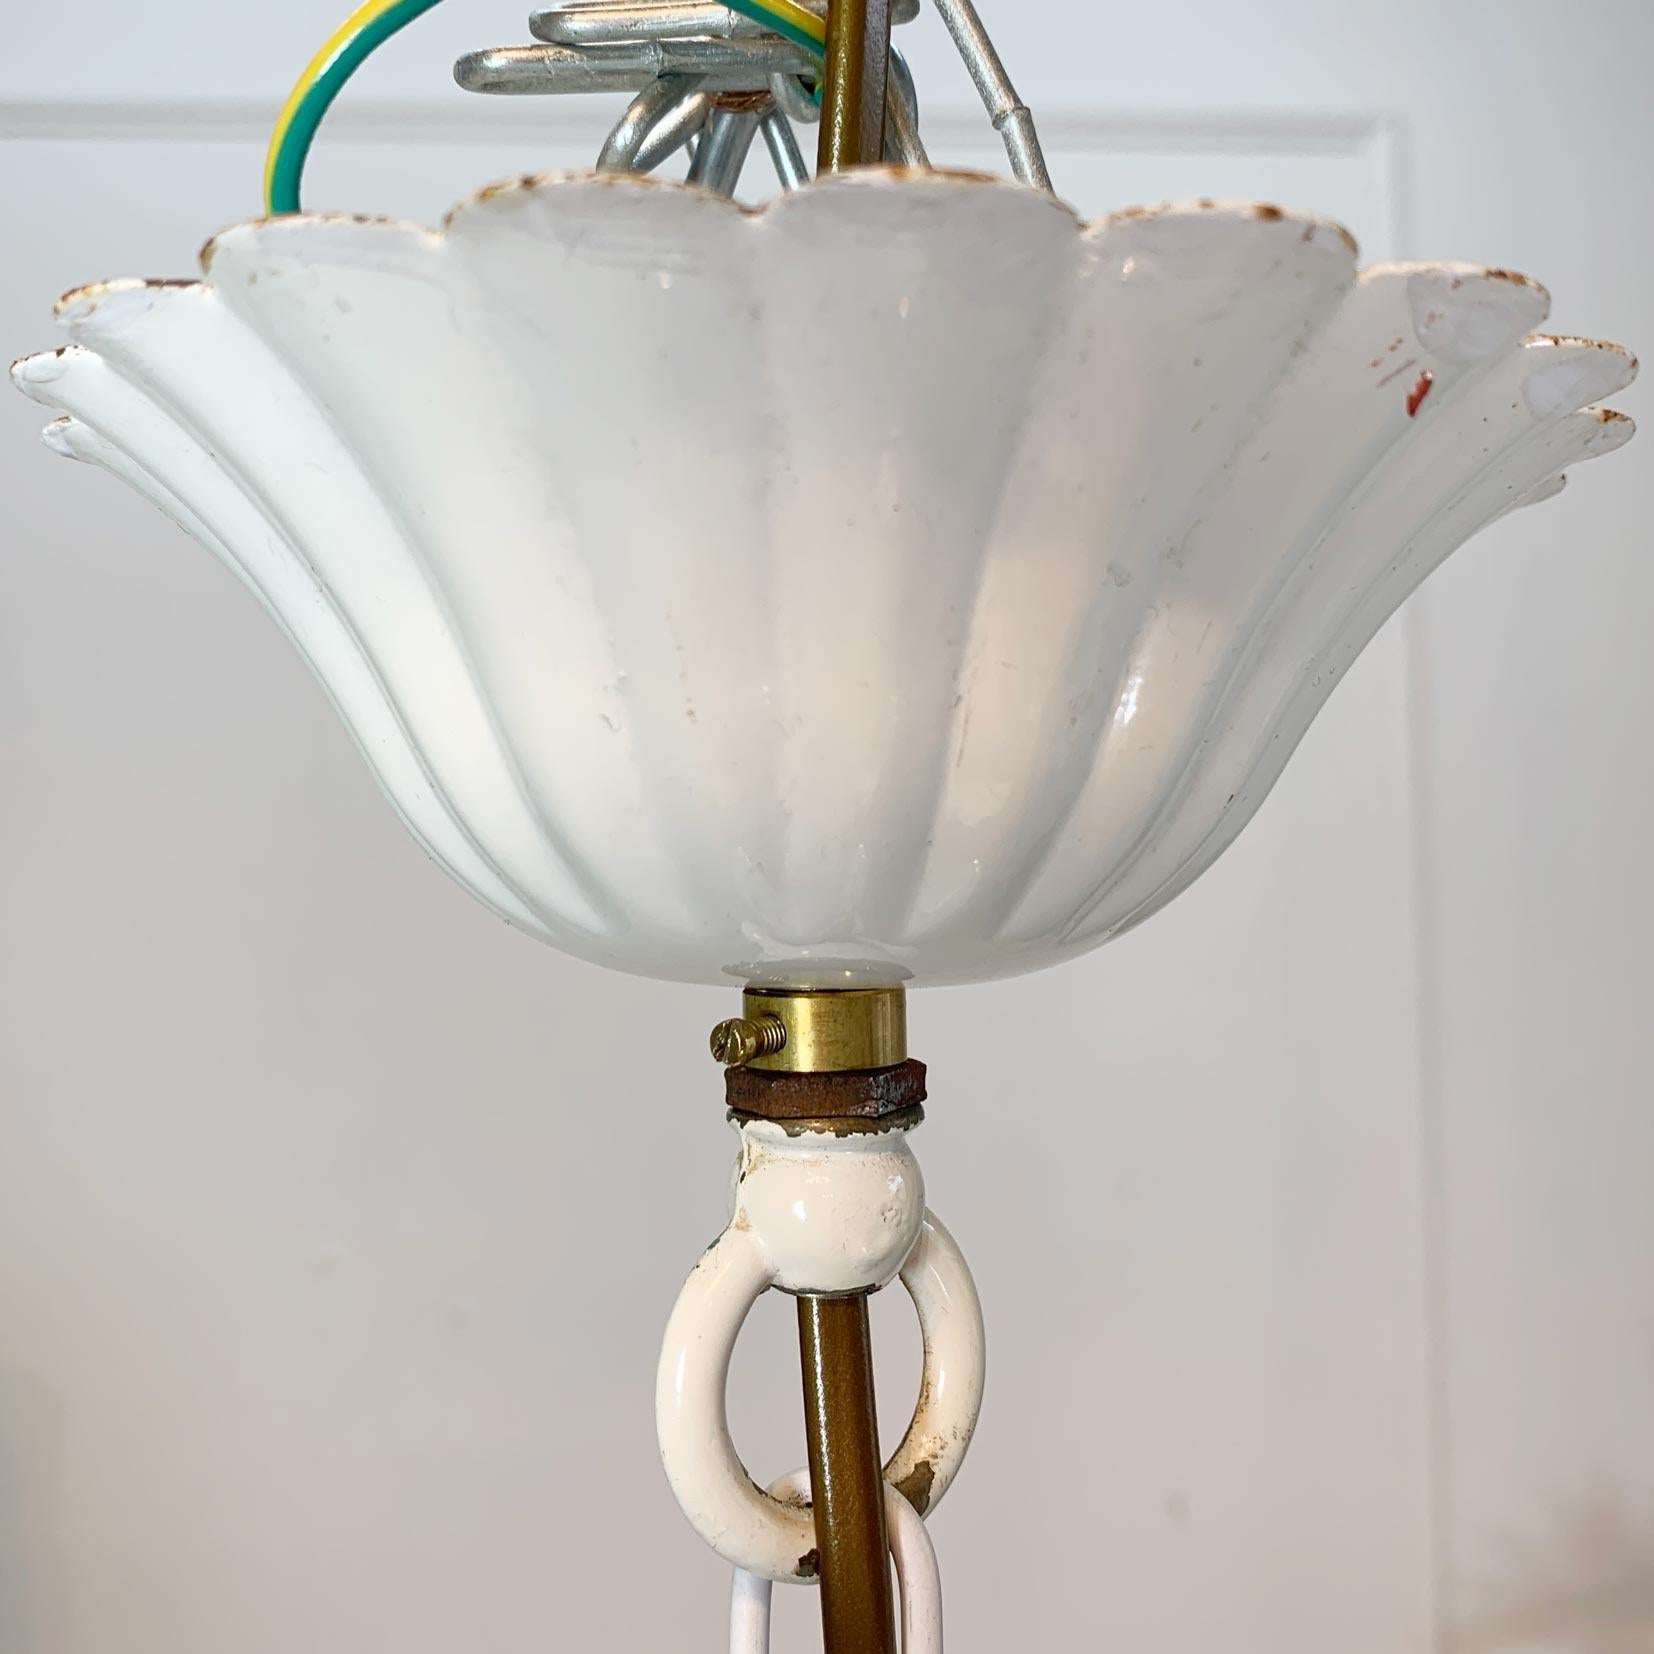 1950’s White Toleware Hot Air Balloon Chandelier For Sale 4